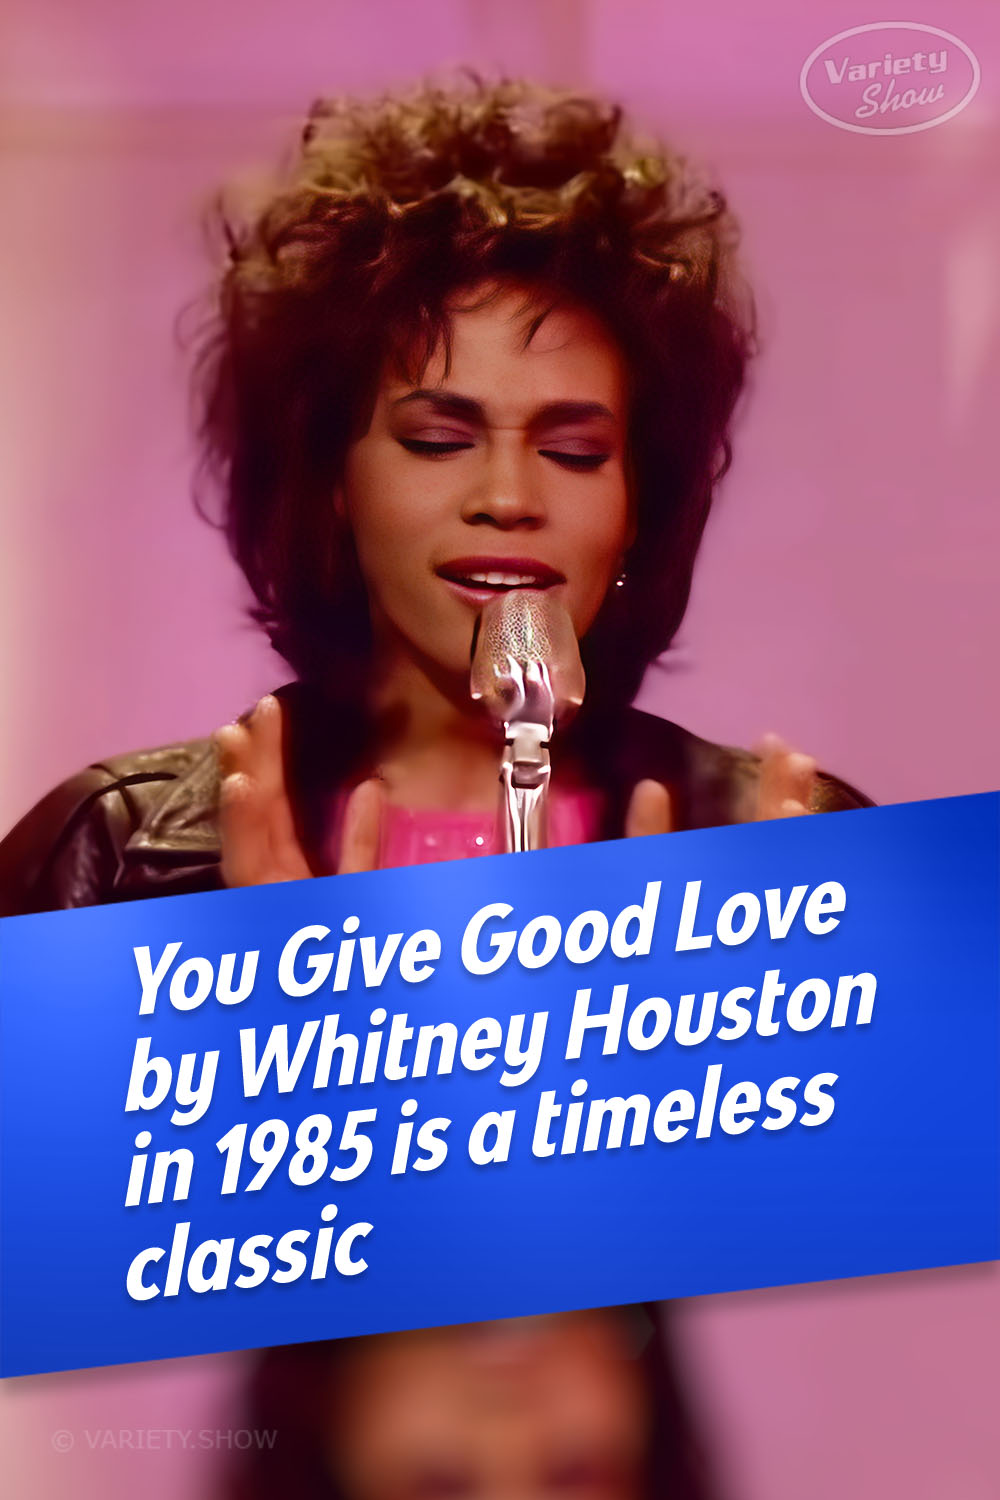 You Give Good Love by Whitney Houston in 1985 is a timeless classic